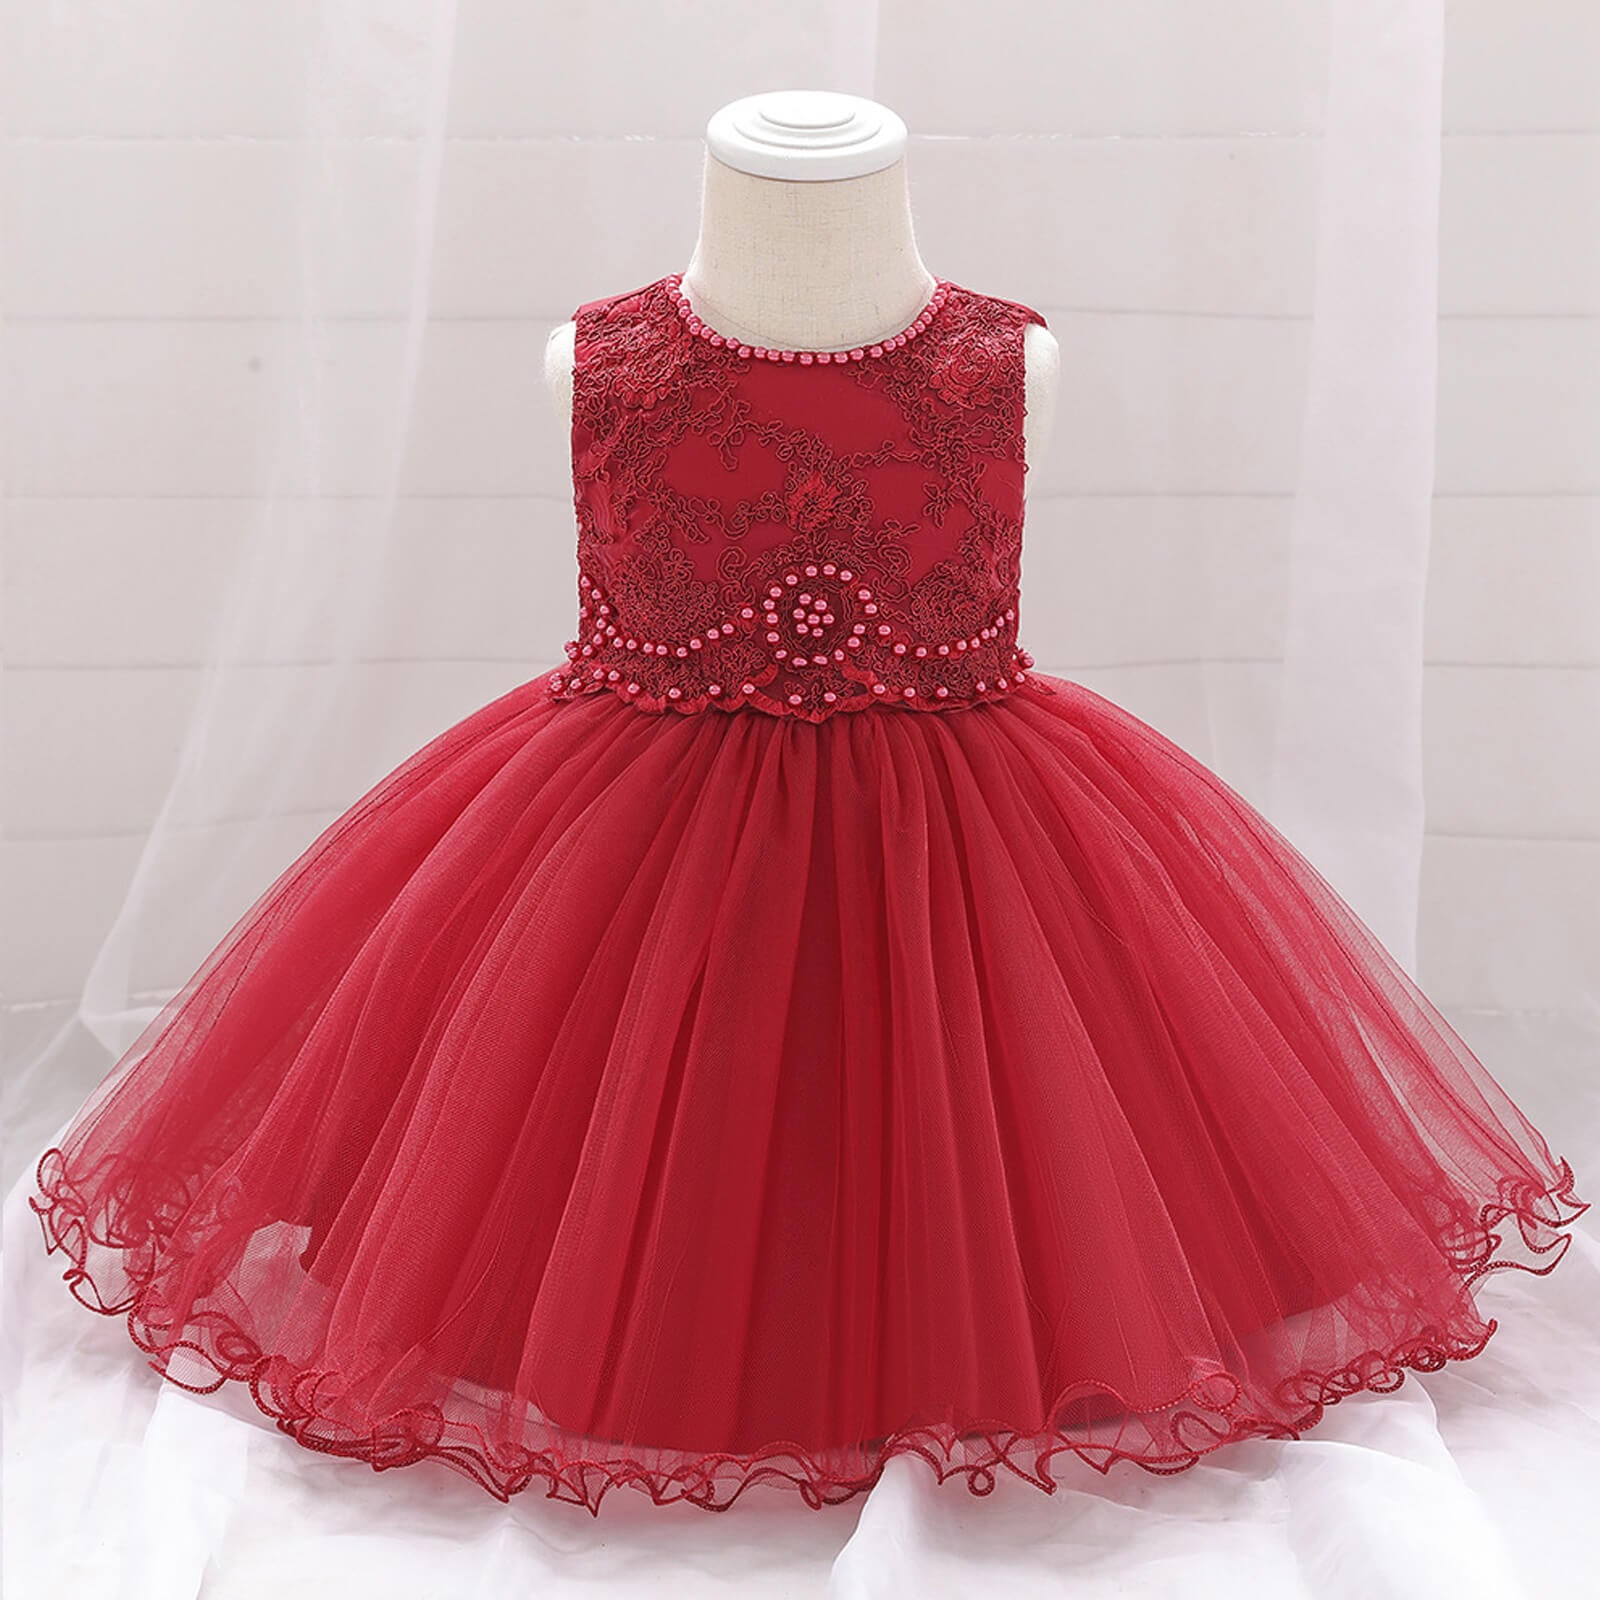 Toddler Baby Girl Party Dress Fancy Sleeveless Pageant Tutu Dresses